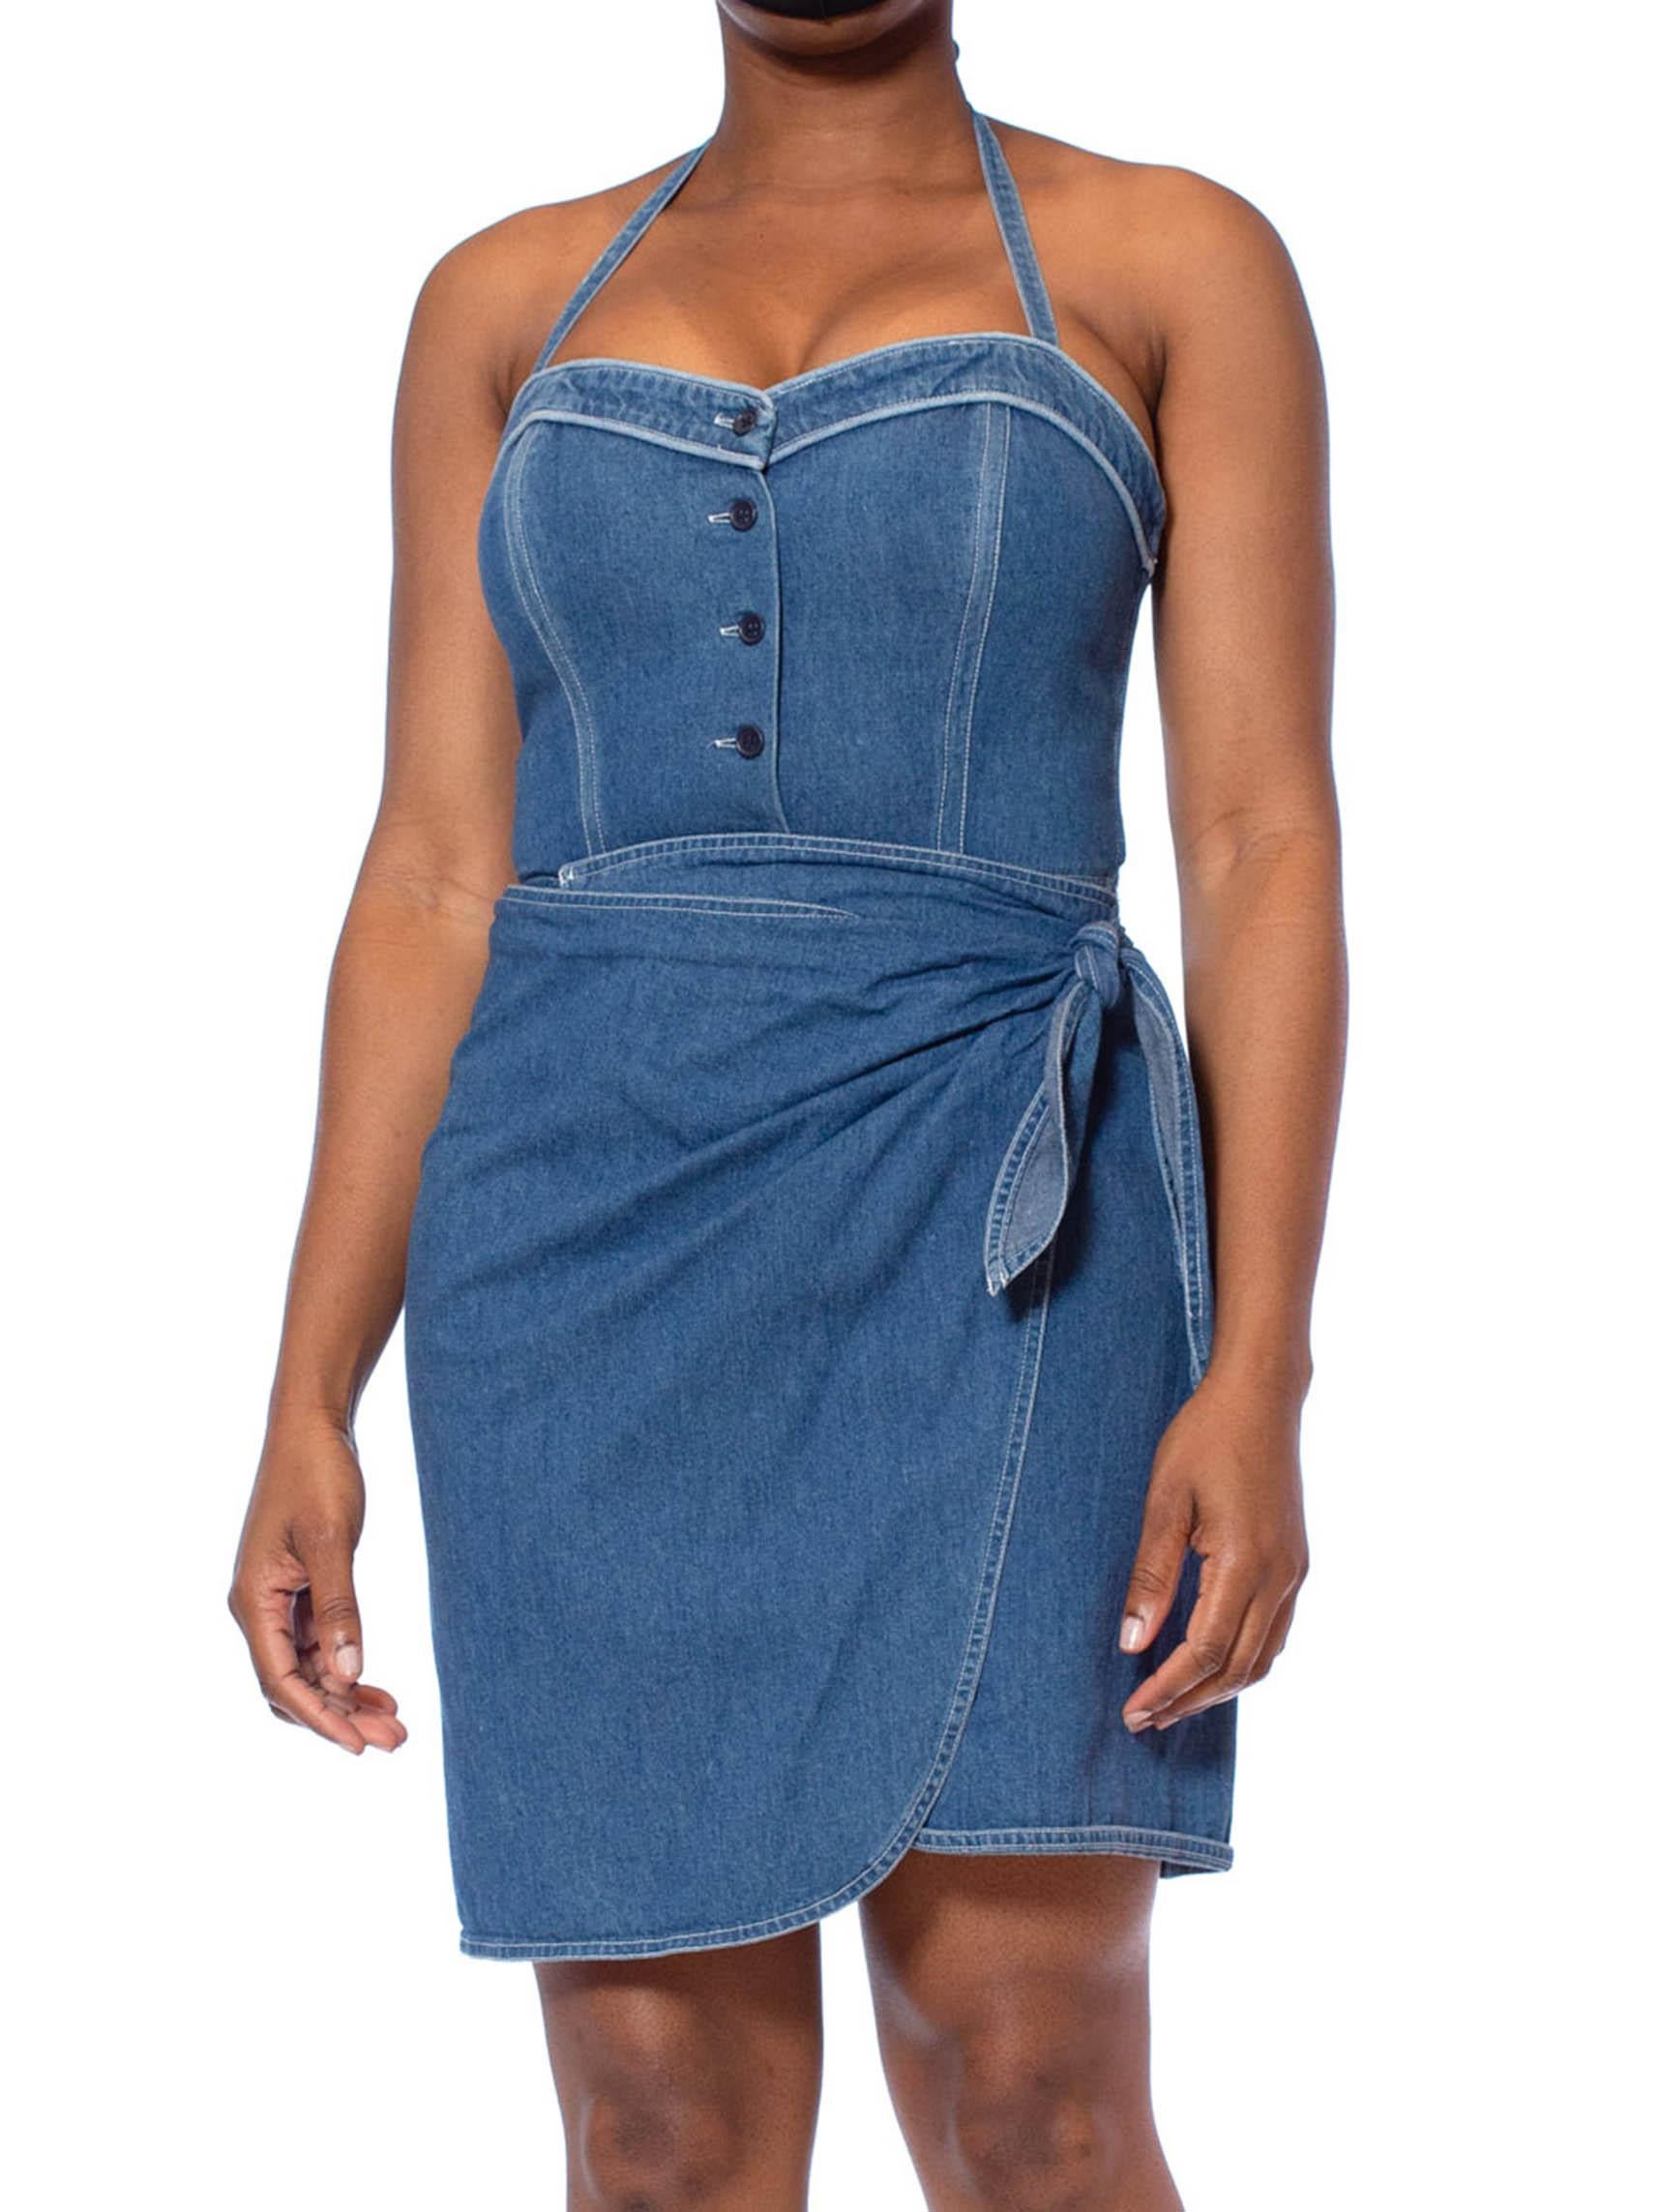 Large size with elastic gored sides for accommodating fit. 1990S DKNY DONNA KARAN Denim Cotton Pin-Up Bodysuit Wrap Skirt Dress 